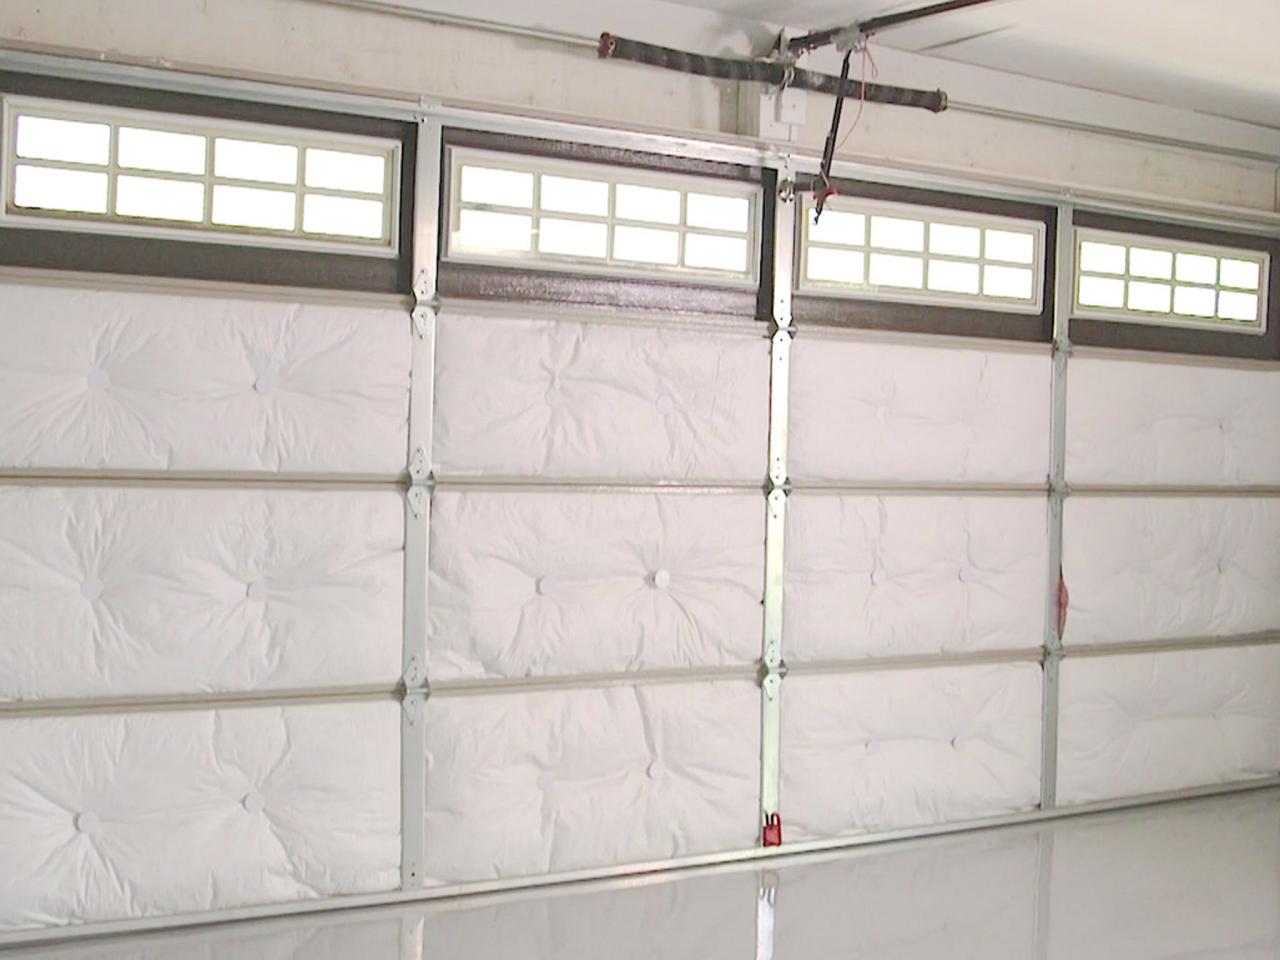 How to insulate a garage door to maintain temperature? 2